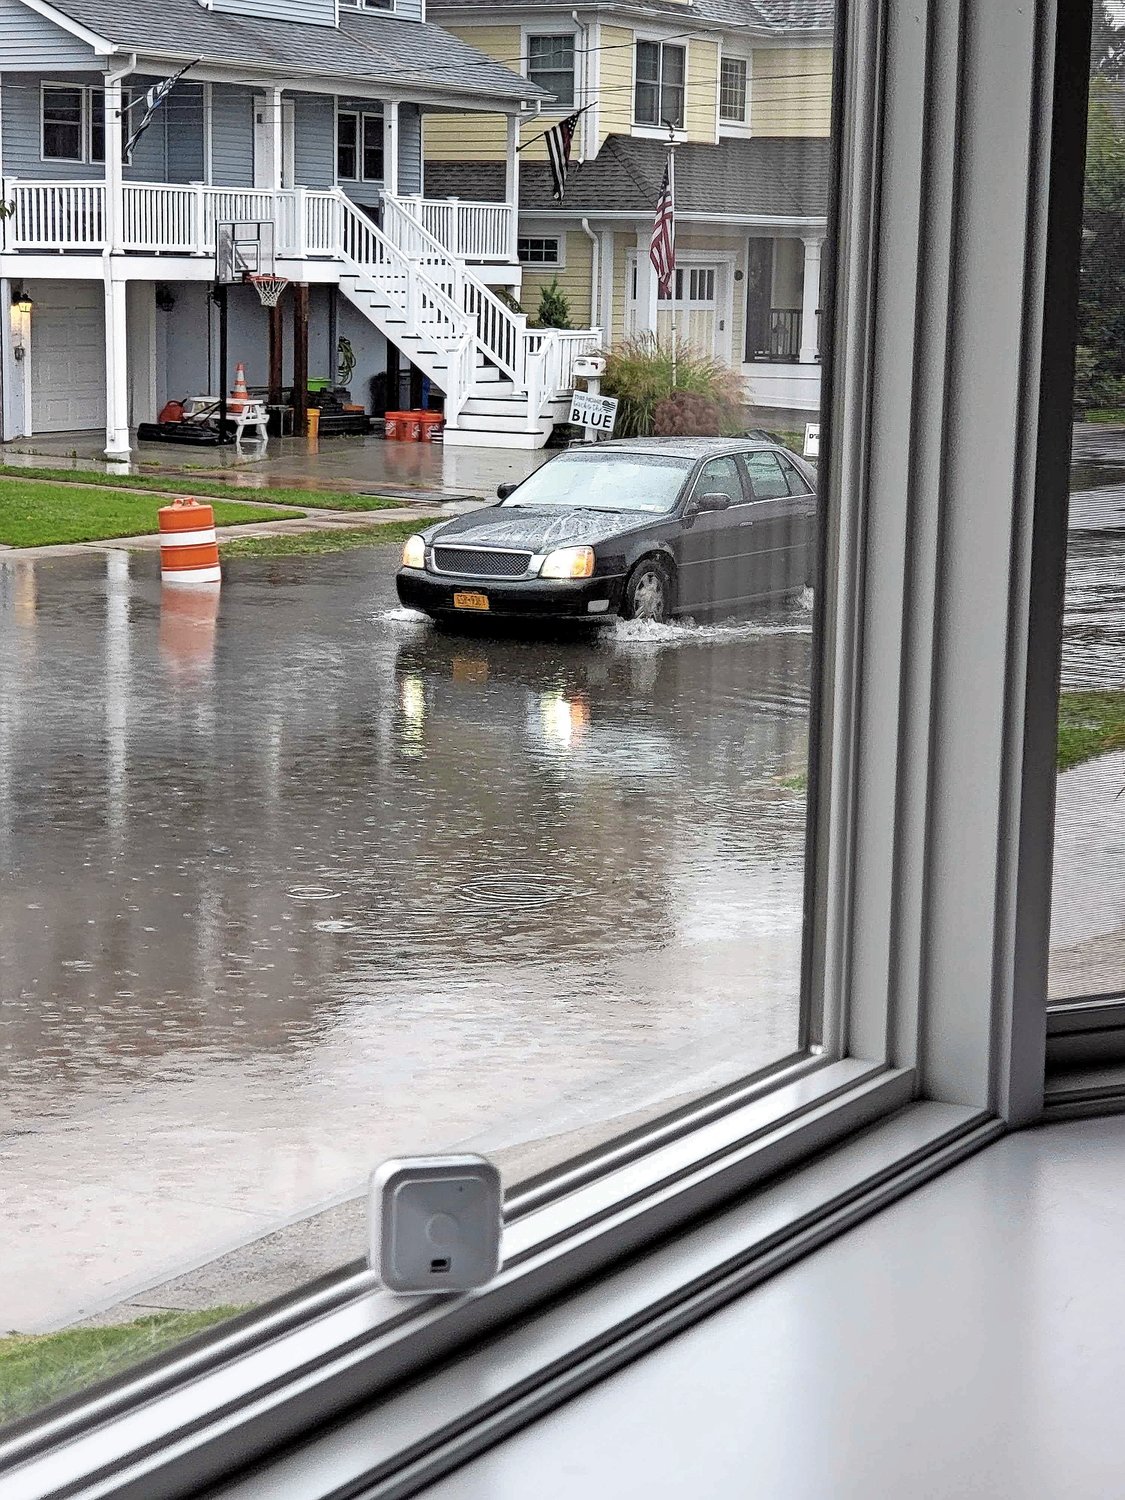 Residents were forced to drive to work through floodwater, because the contractor, DP Civil, did not get the water pumped out in time.